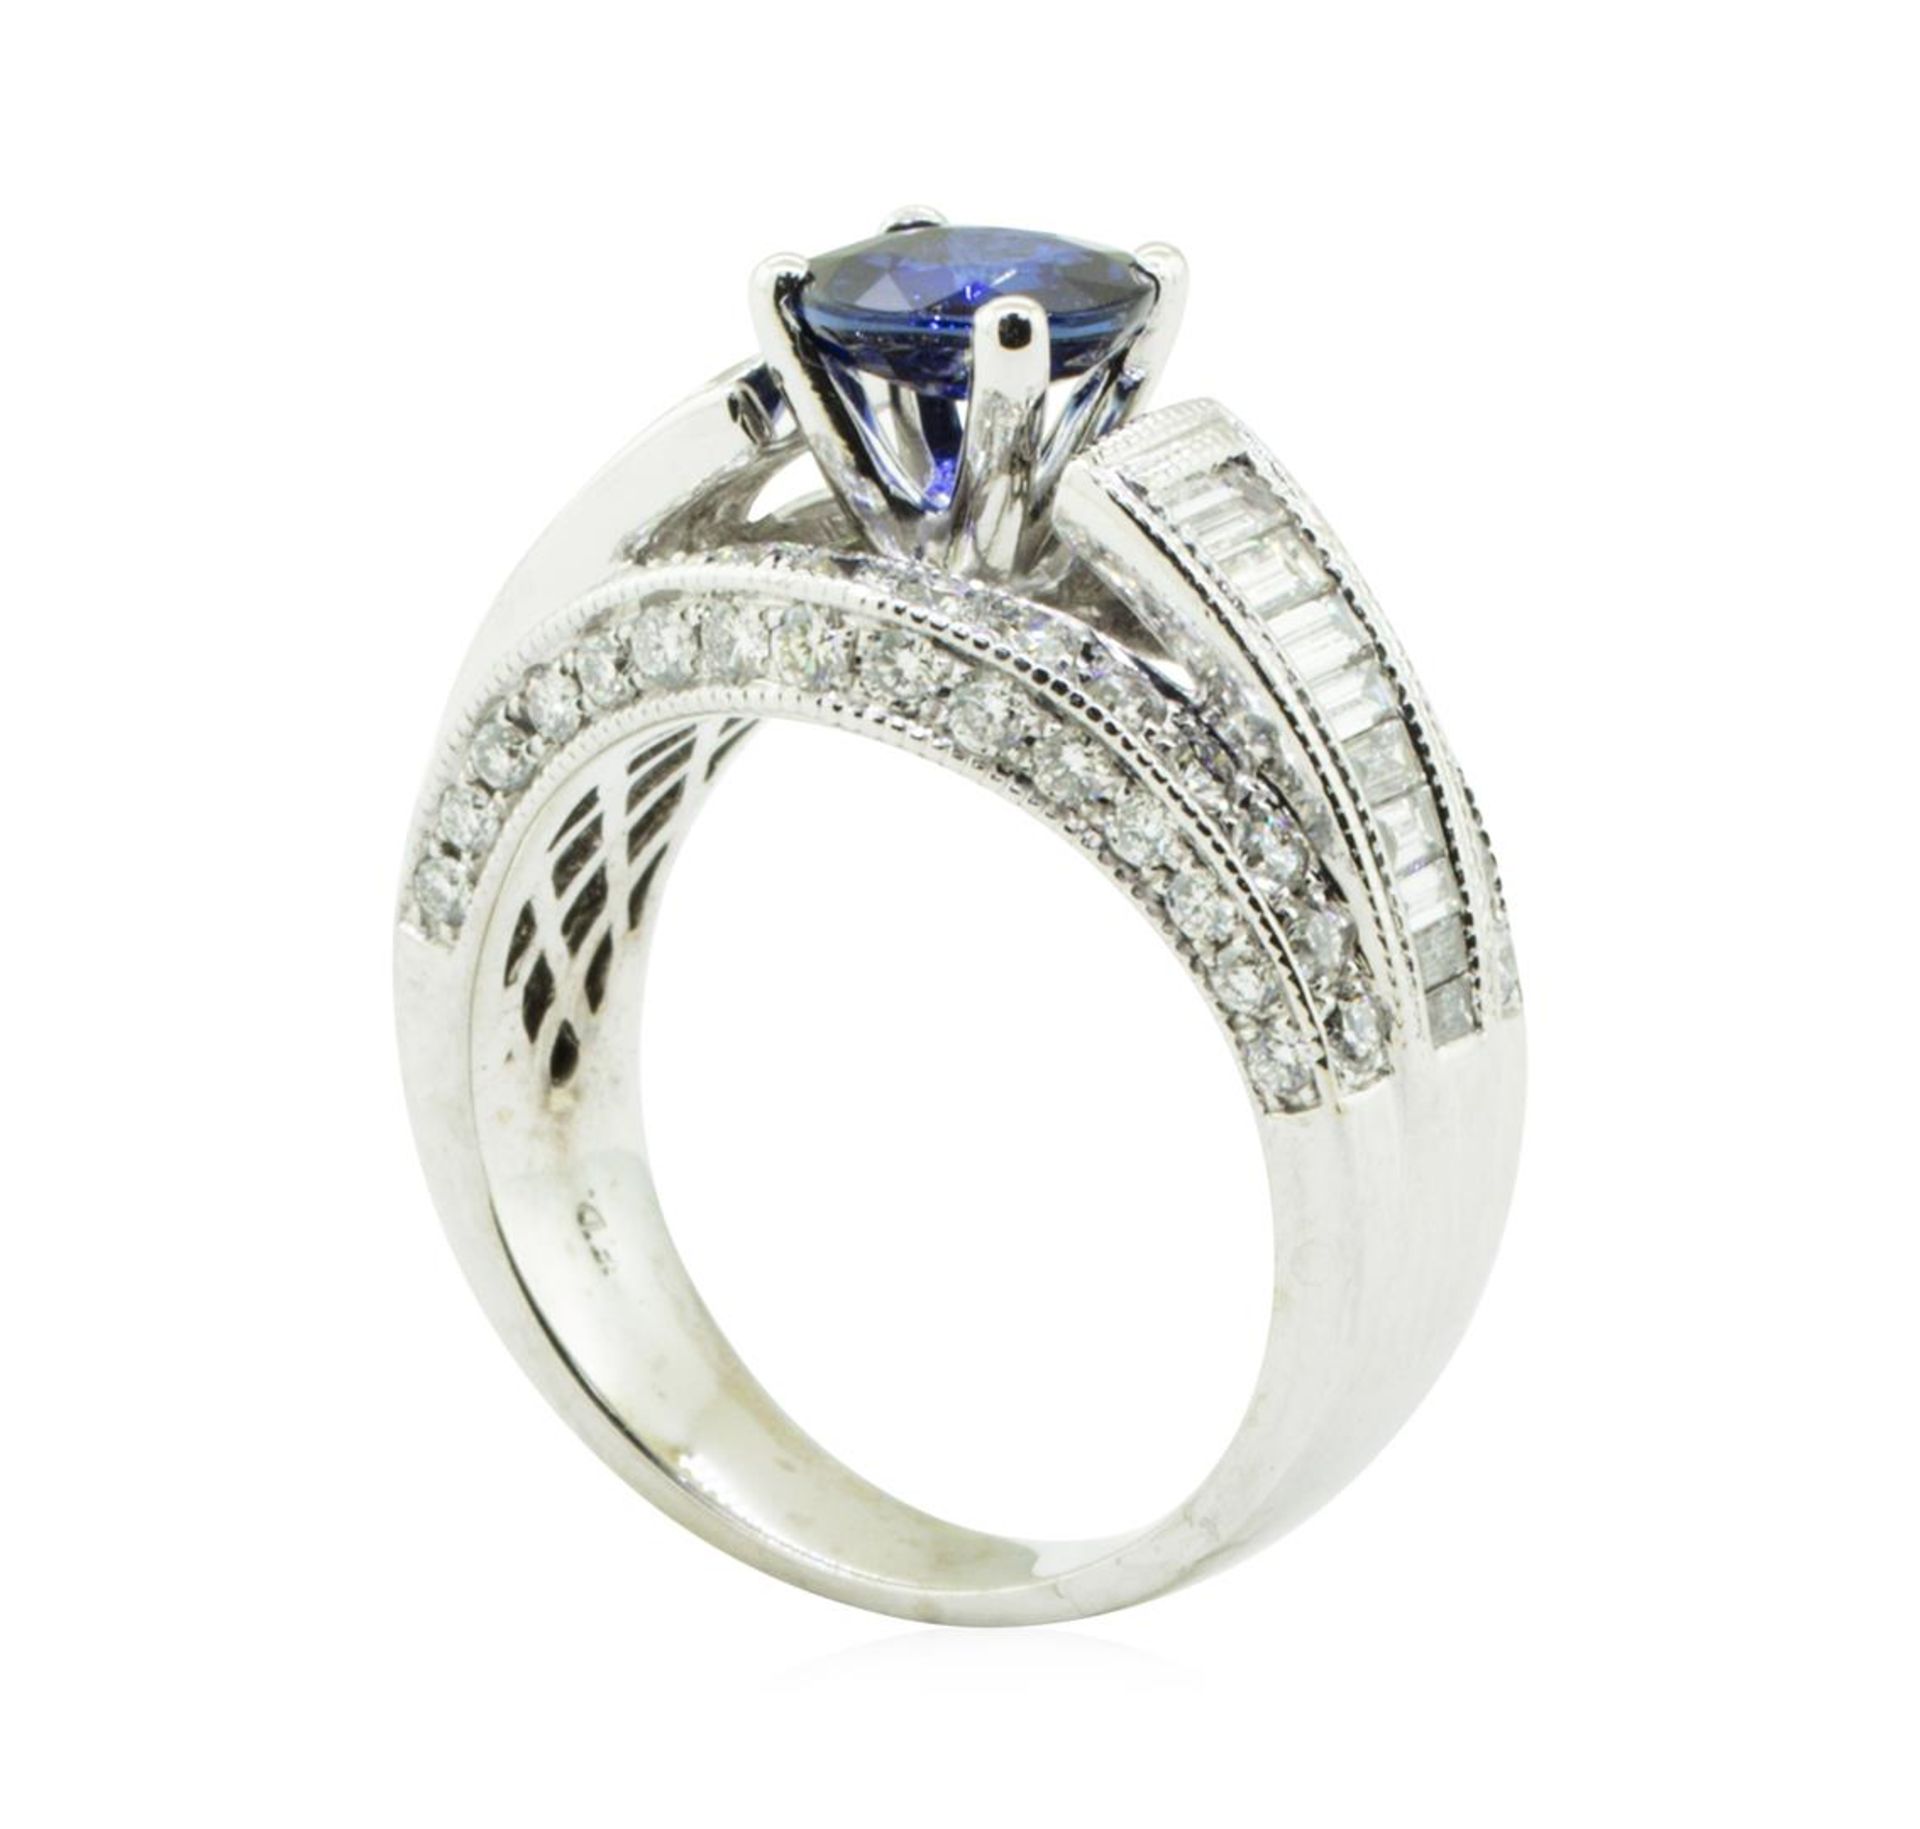 2.49 ctw Round Brilliant Blue Sapphire And Diamond Ring - 14KT White Gold - Image 4 of 5